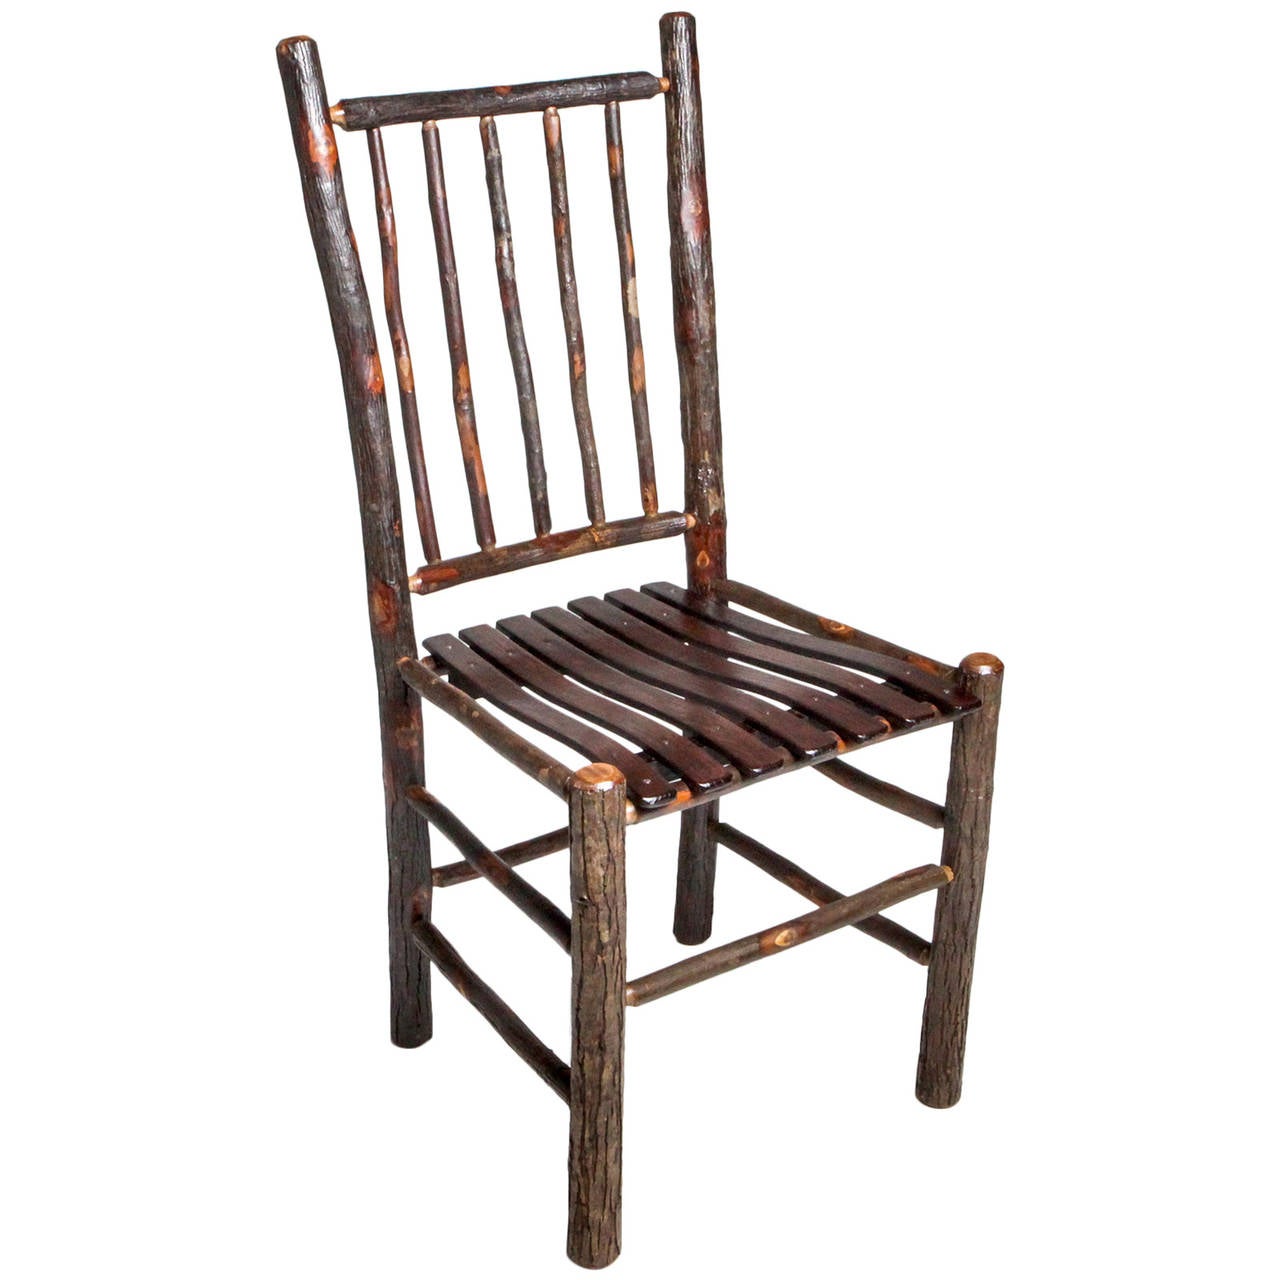 Adirondack Spindle Back Chair For Sale at 1stdibs